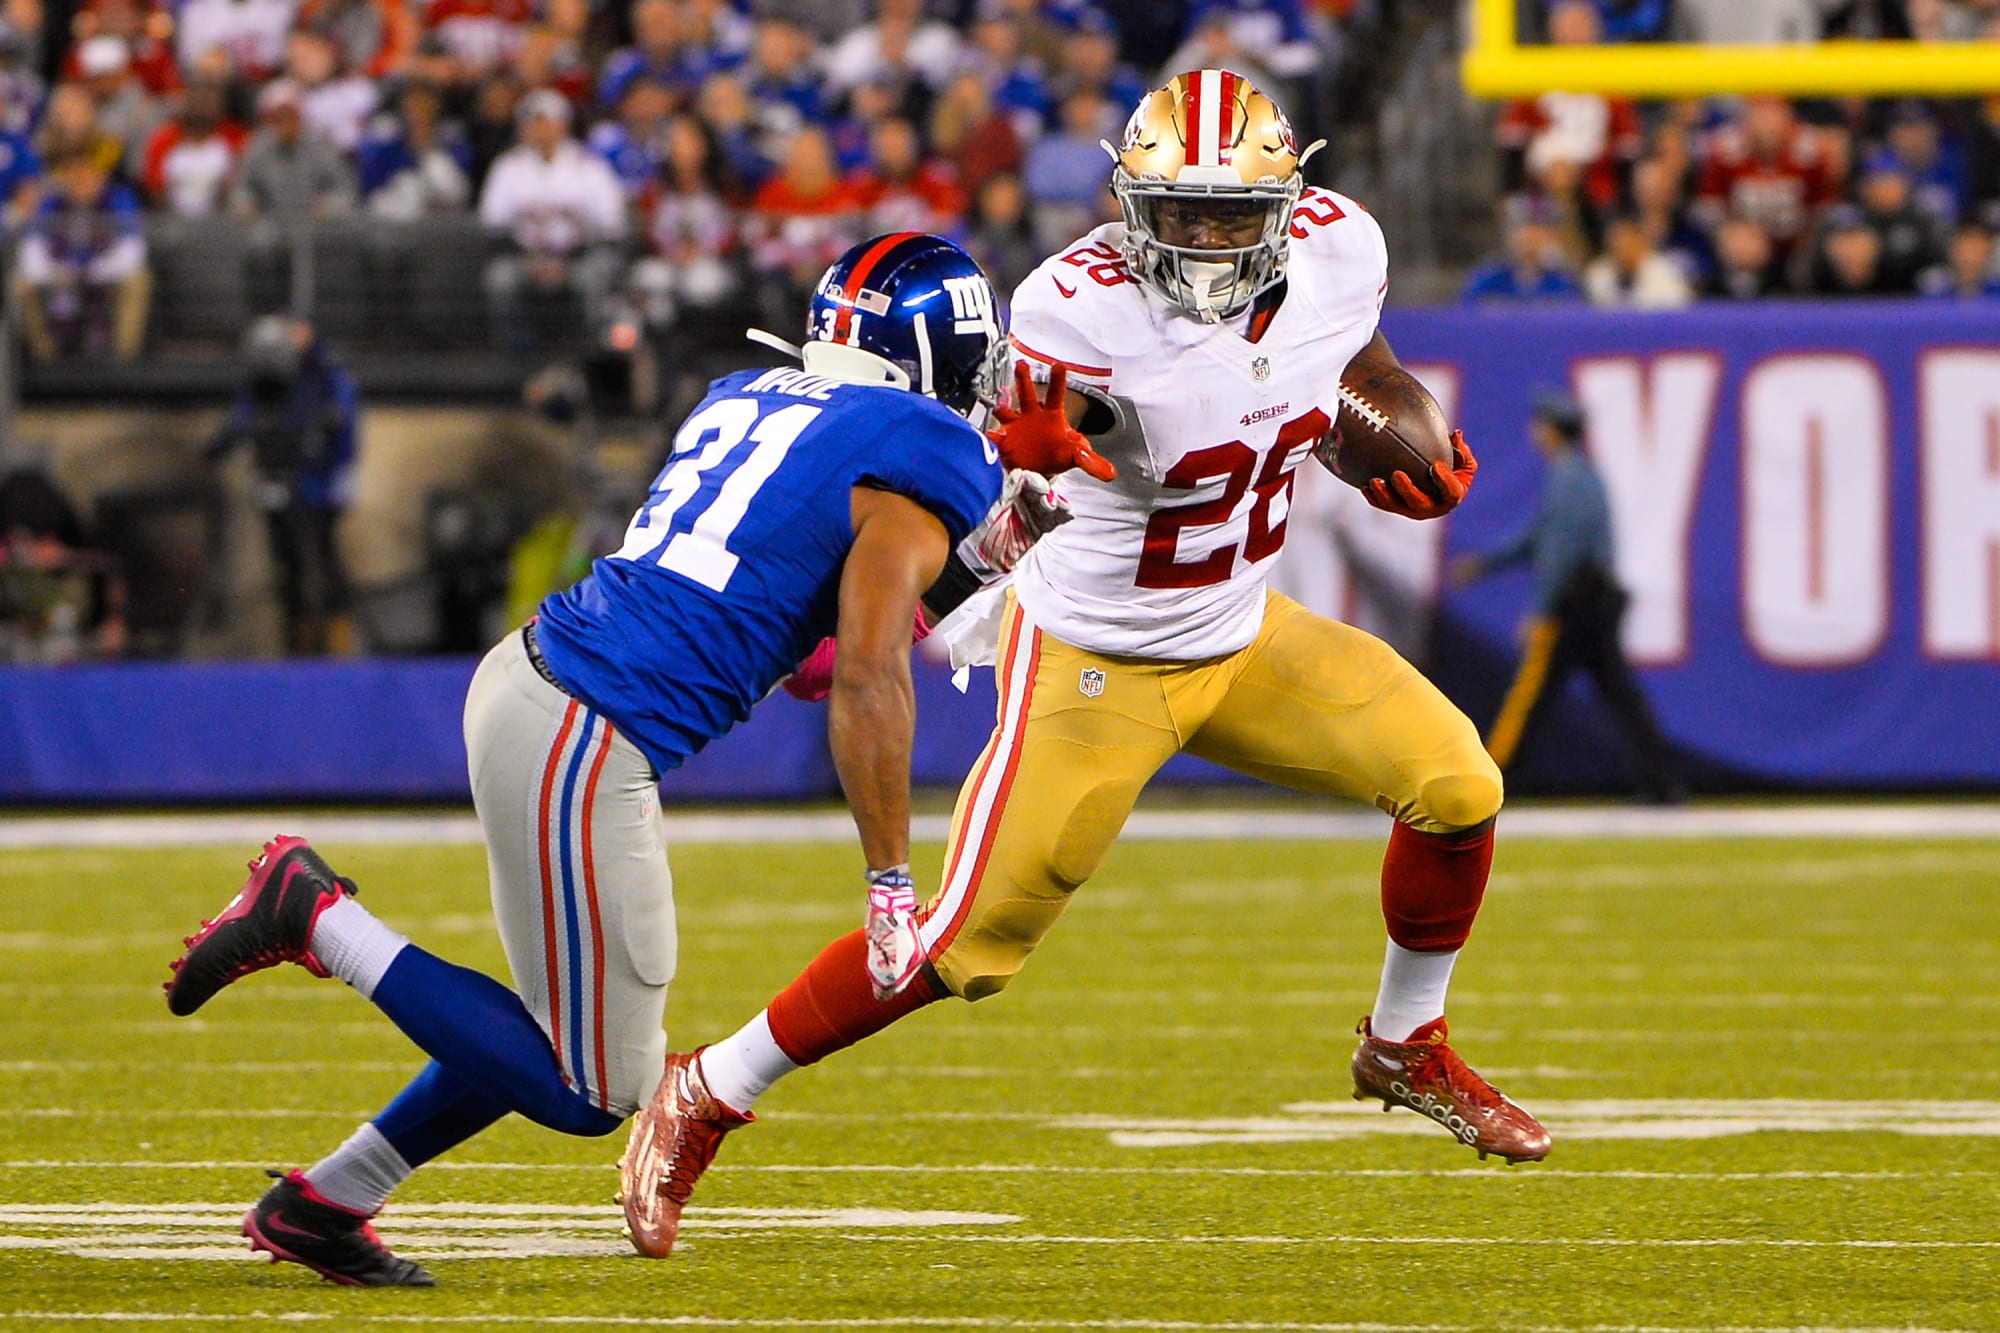 Giants vs. 49ers Preview, score prediction for Week 10